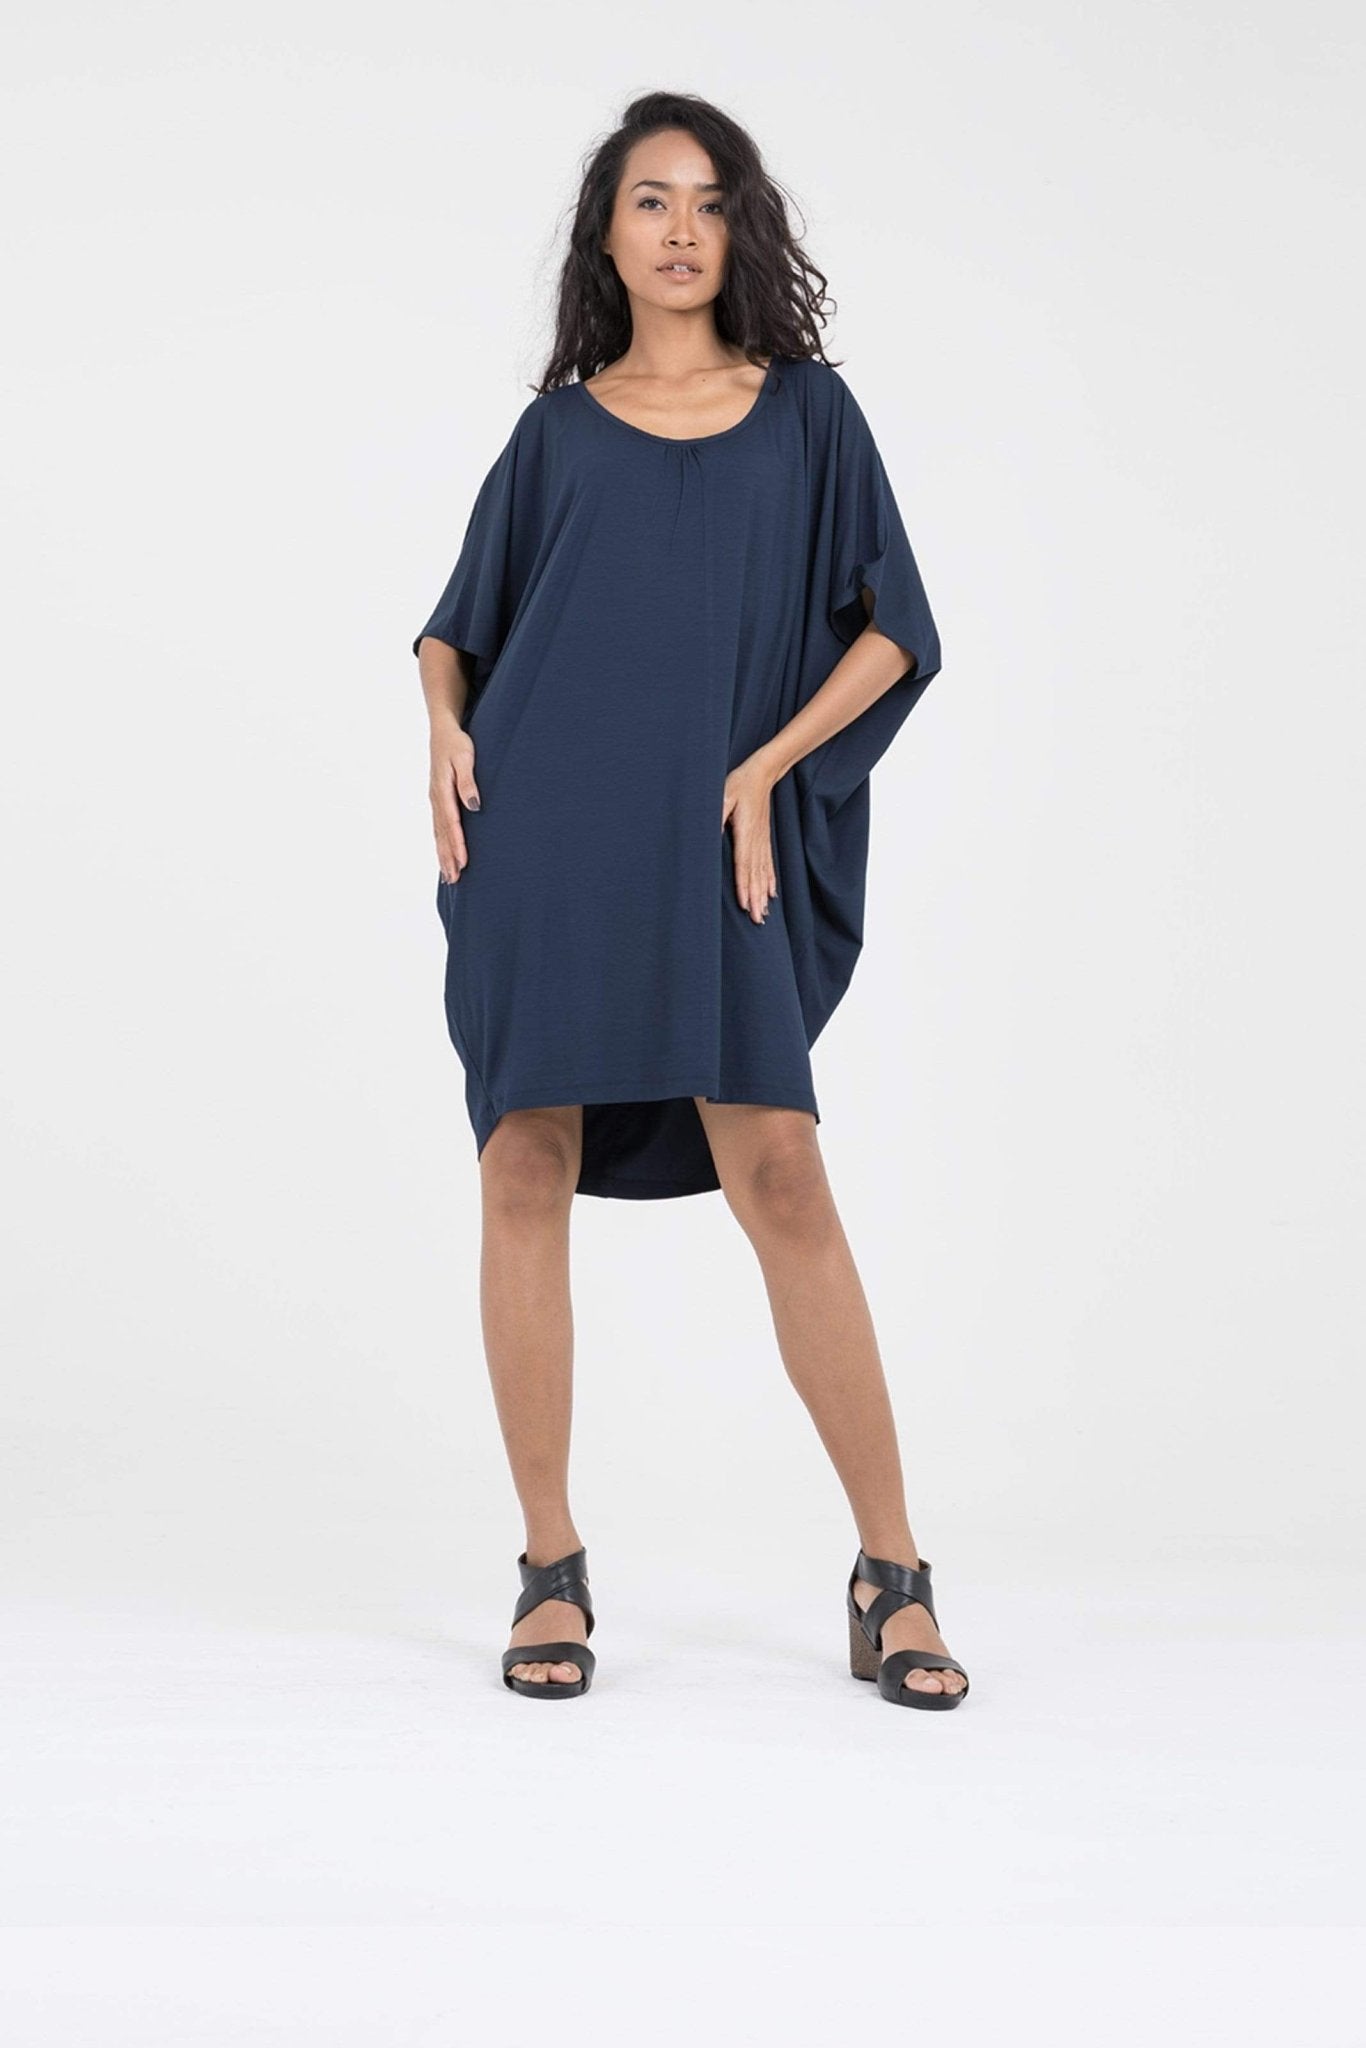 Donnah Cocoon Dress in Navy Dress Stride